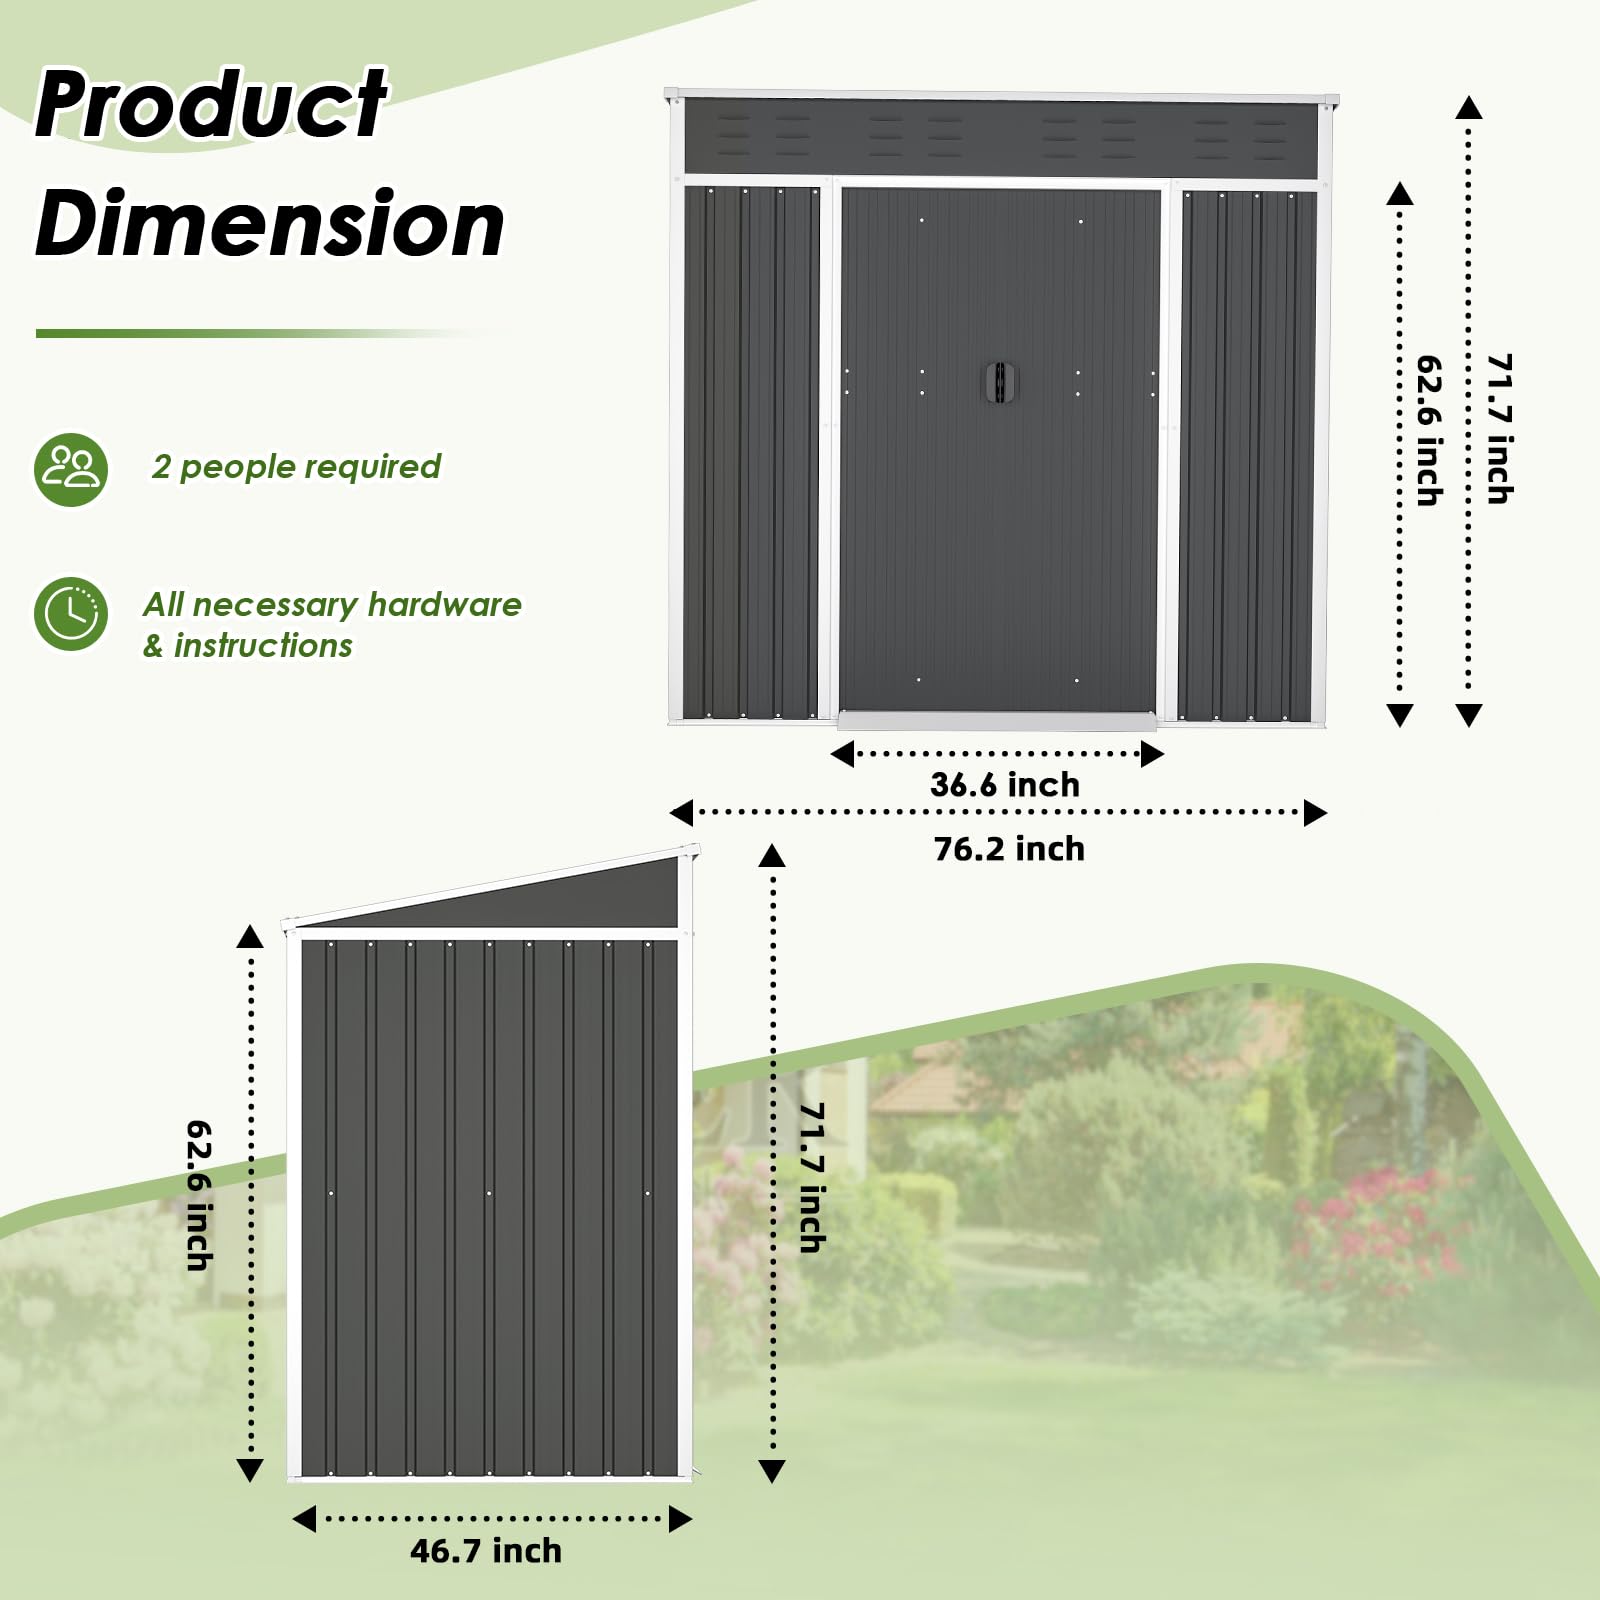 Patiomore 4X6 FT Outdoor Garden Storage Shed Yard Tool Storage Steel House with Sliding Door (White)